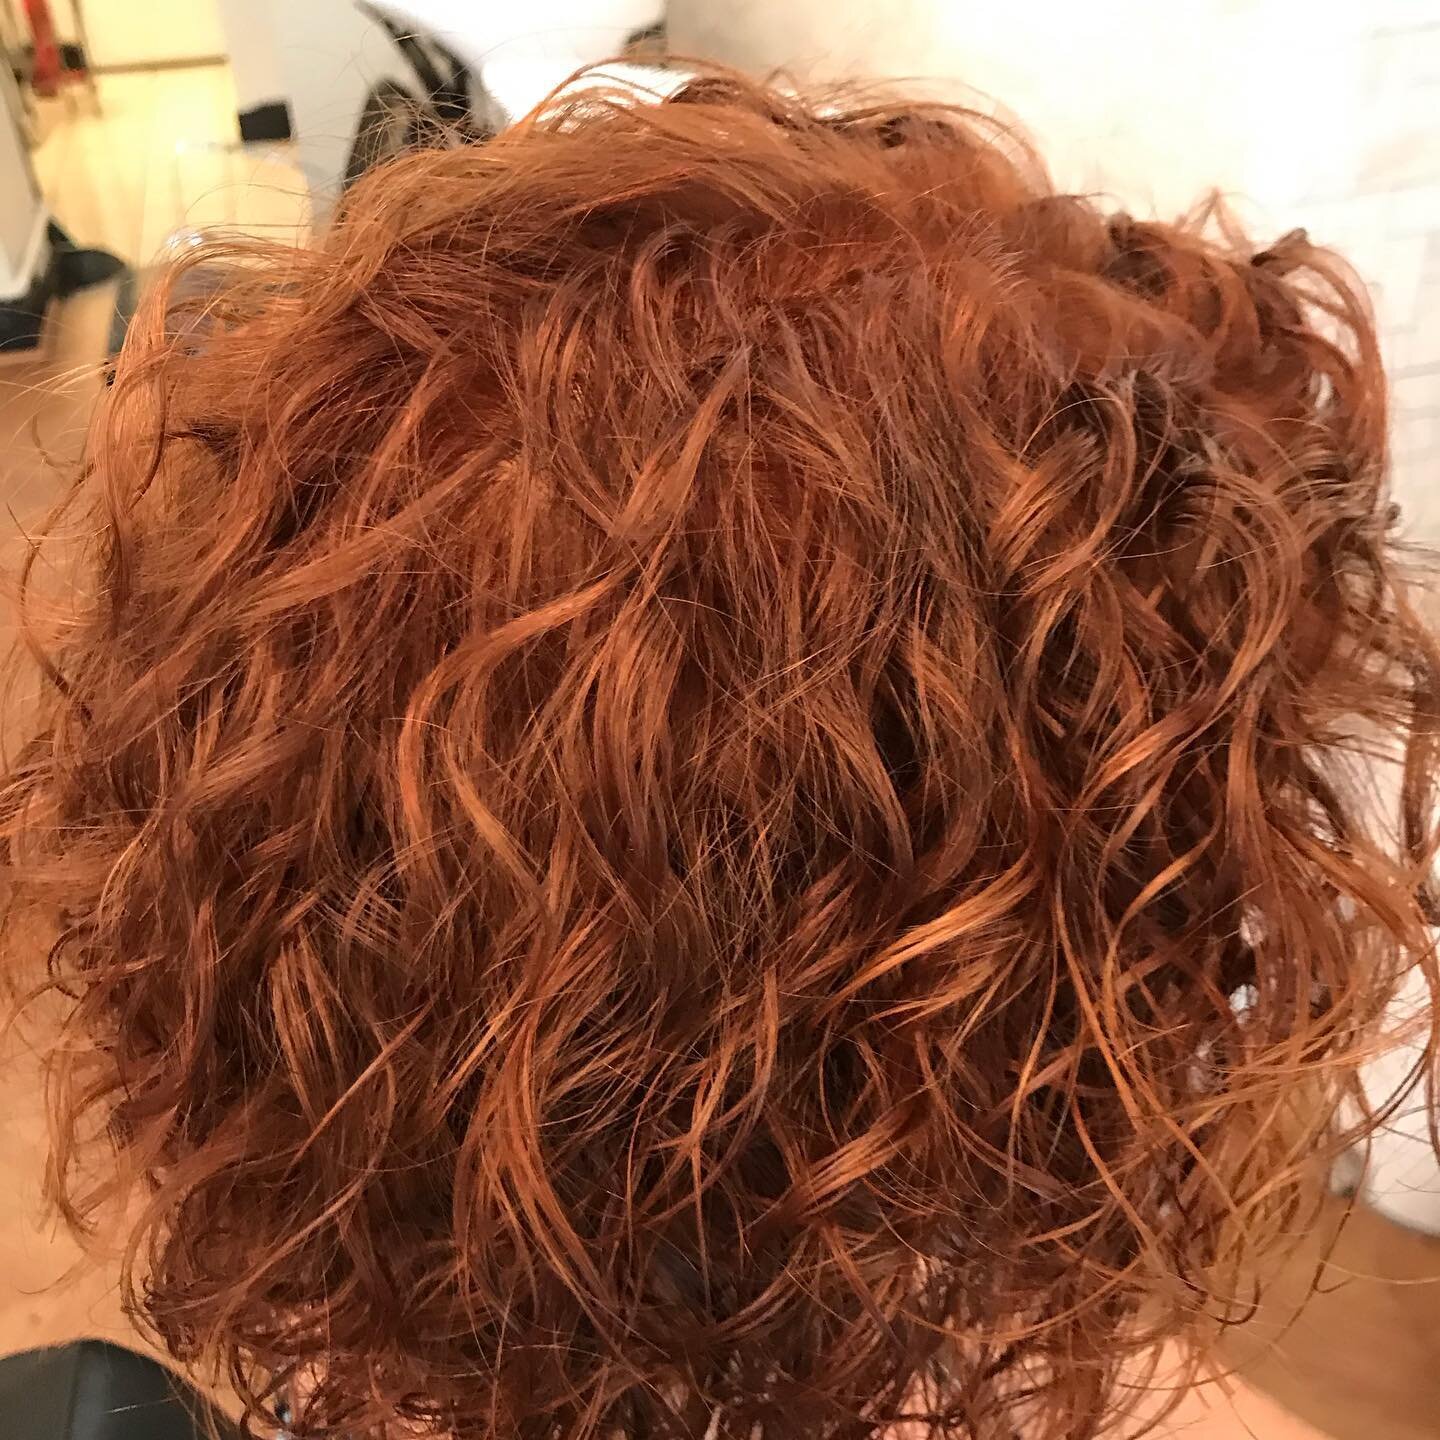 Seeing red. Transformation Saturday for this beauty. Swipe for the the before. 
.
.
. The Magic ingredients: natural level 7. Equal parts 8/43, 9/3, and 7/0 @wellahairusa Color Touch with 4% Emulsion
Stylist @essam_chalf 
.
.
.
#fringehairstudio #dch